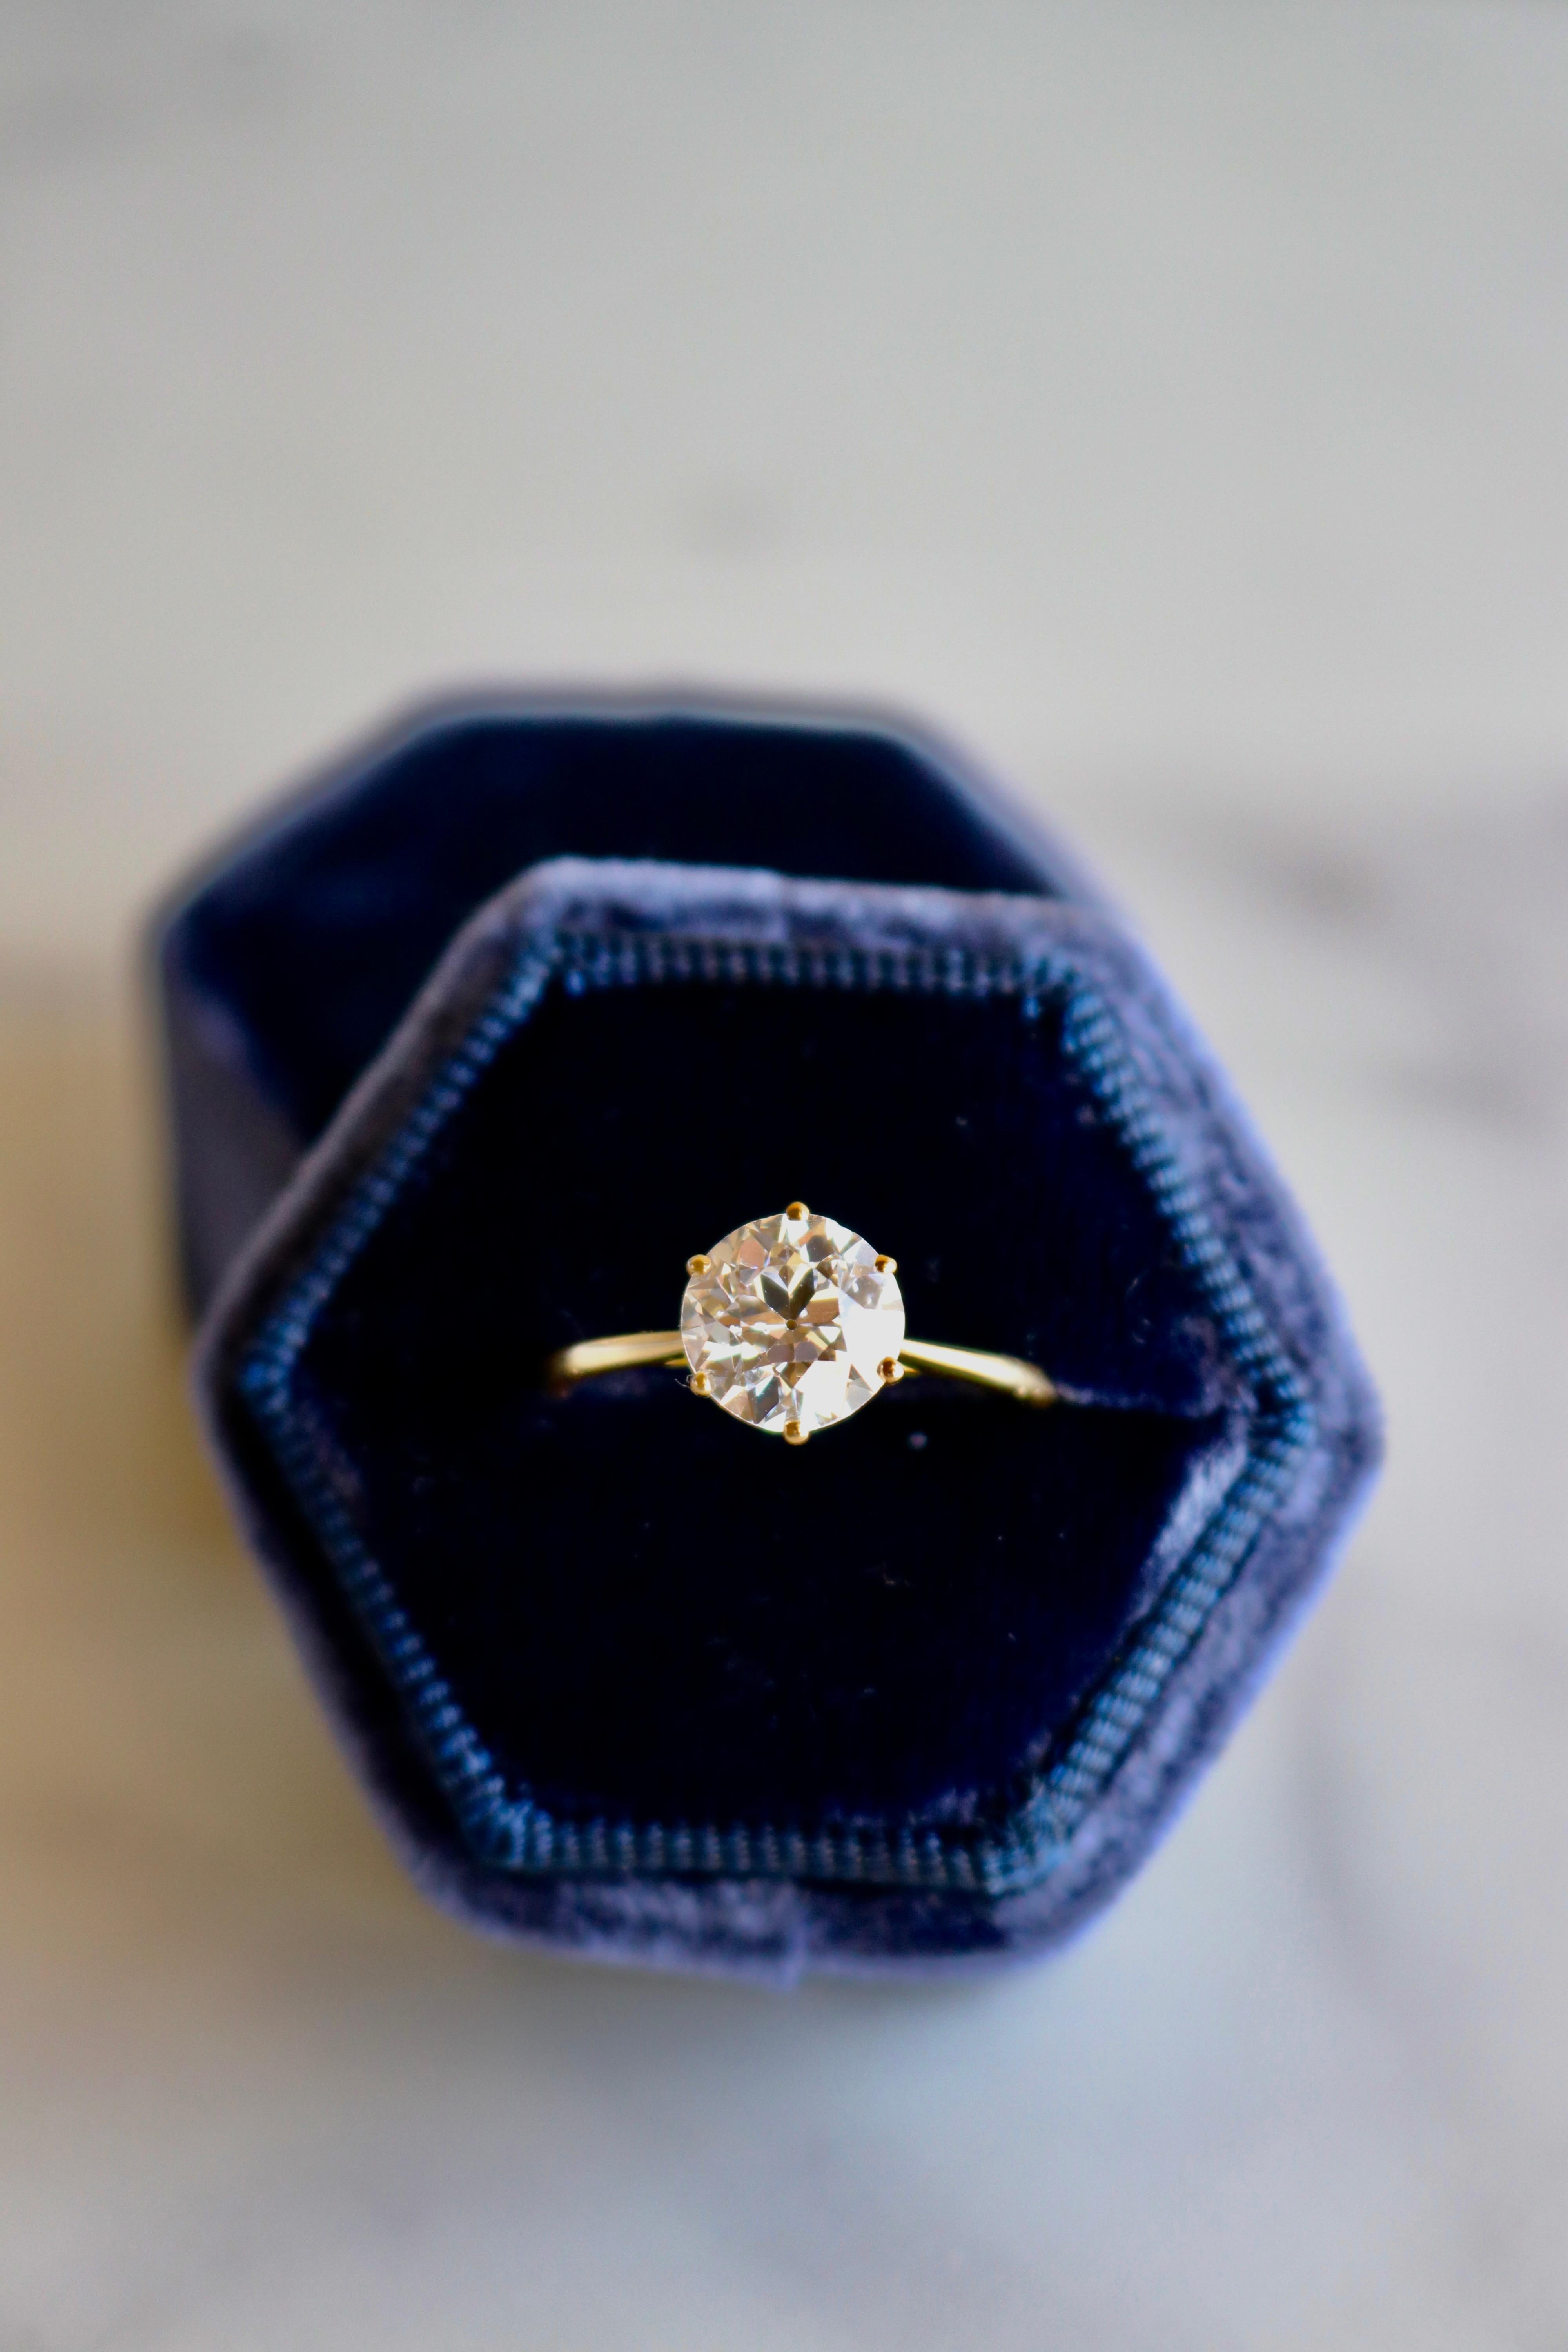 Vintage French GIA 2.12 Carat Old European Cut Diamond 18k Yellow Gold Solitaire For Sale 2